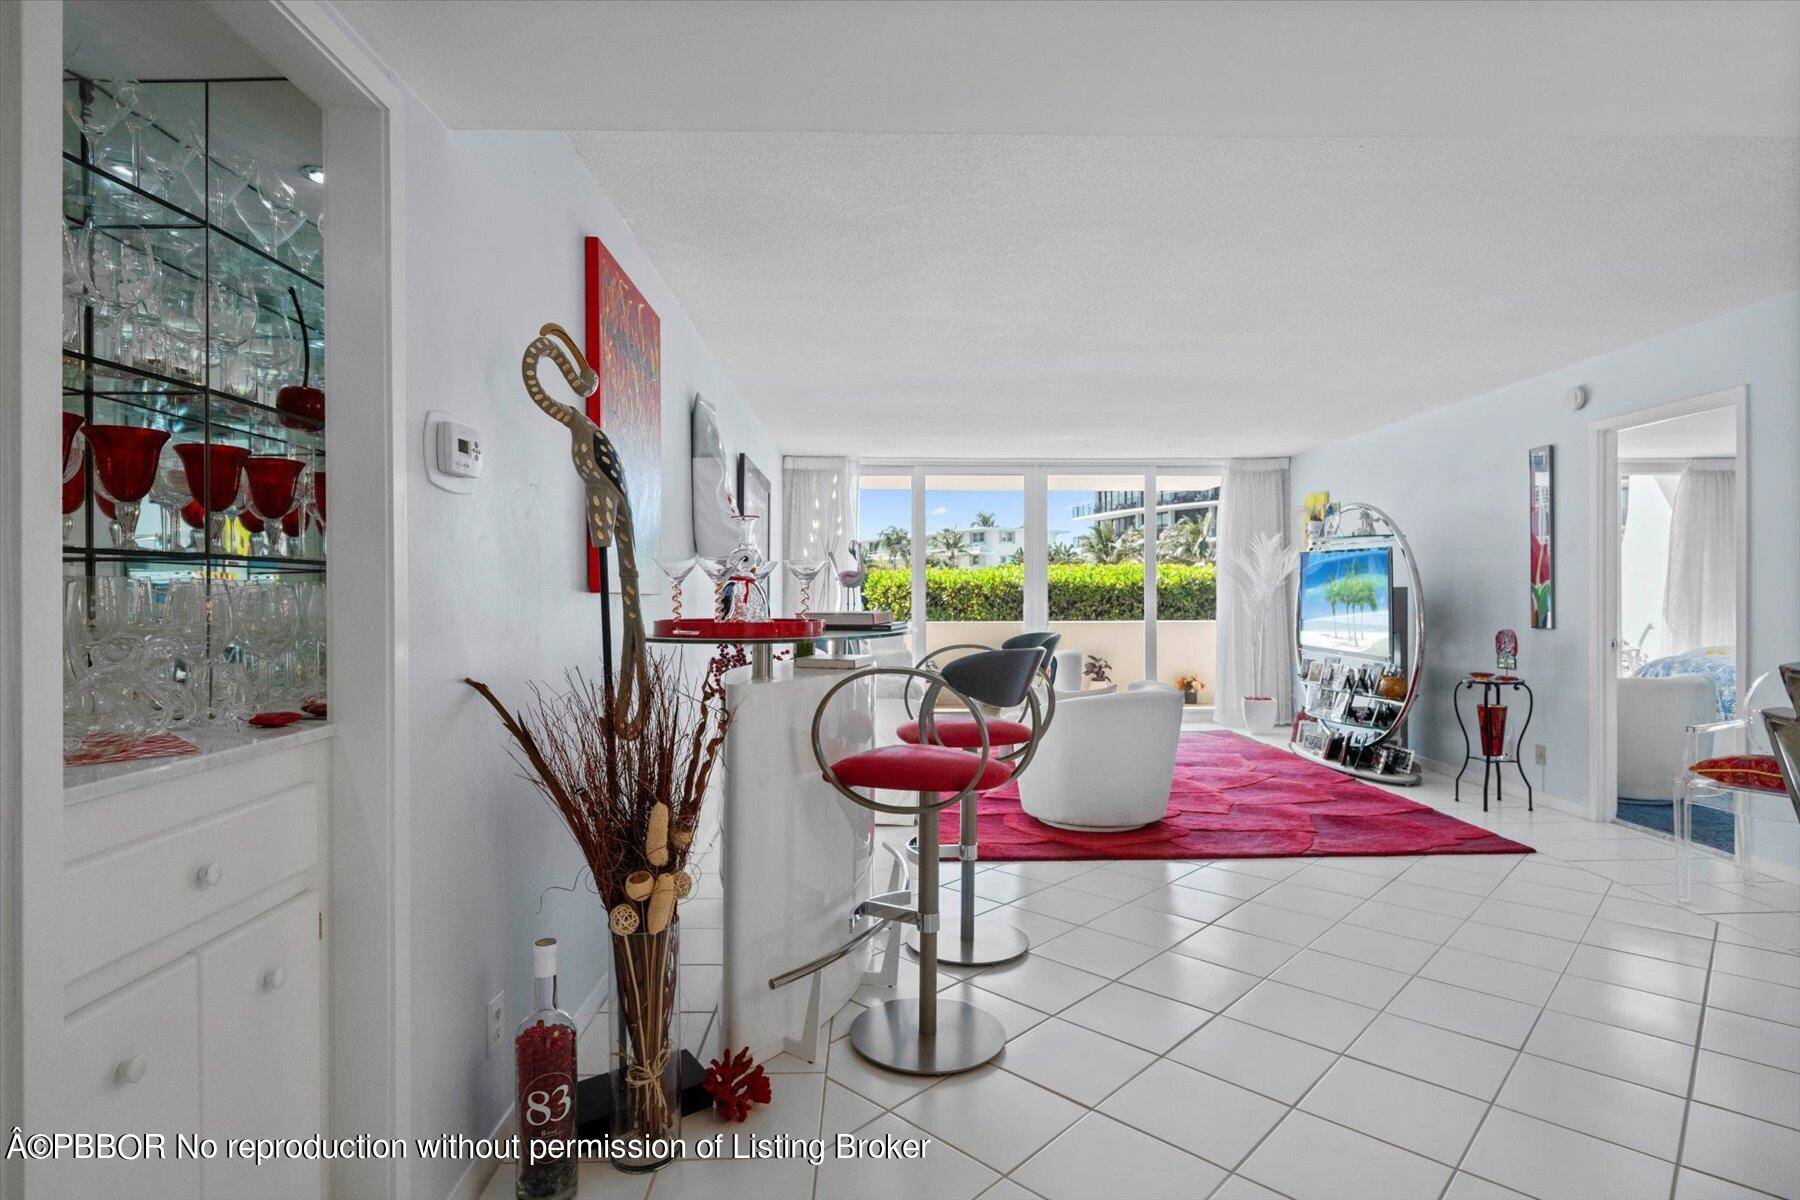 Beautiful 2 bedrooms, 2. 5 baths highly sought after oceanfront Sun and Surf condo.